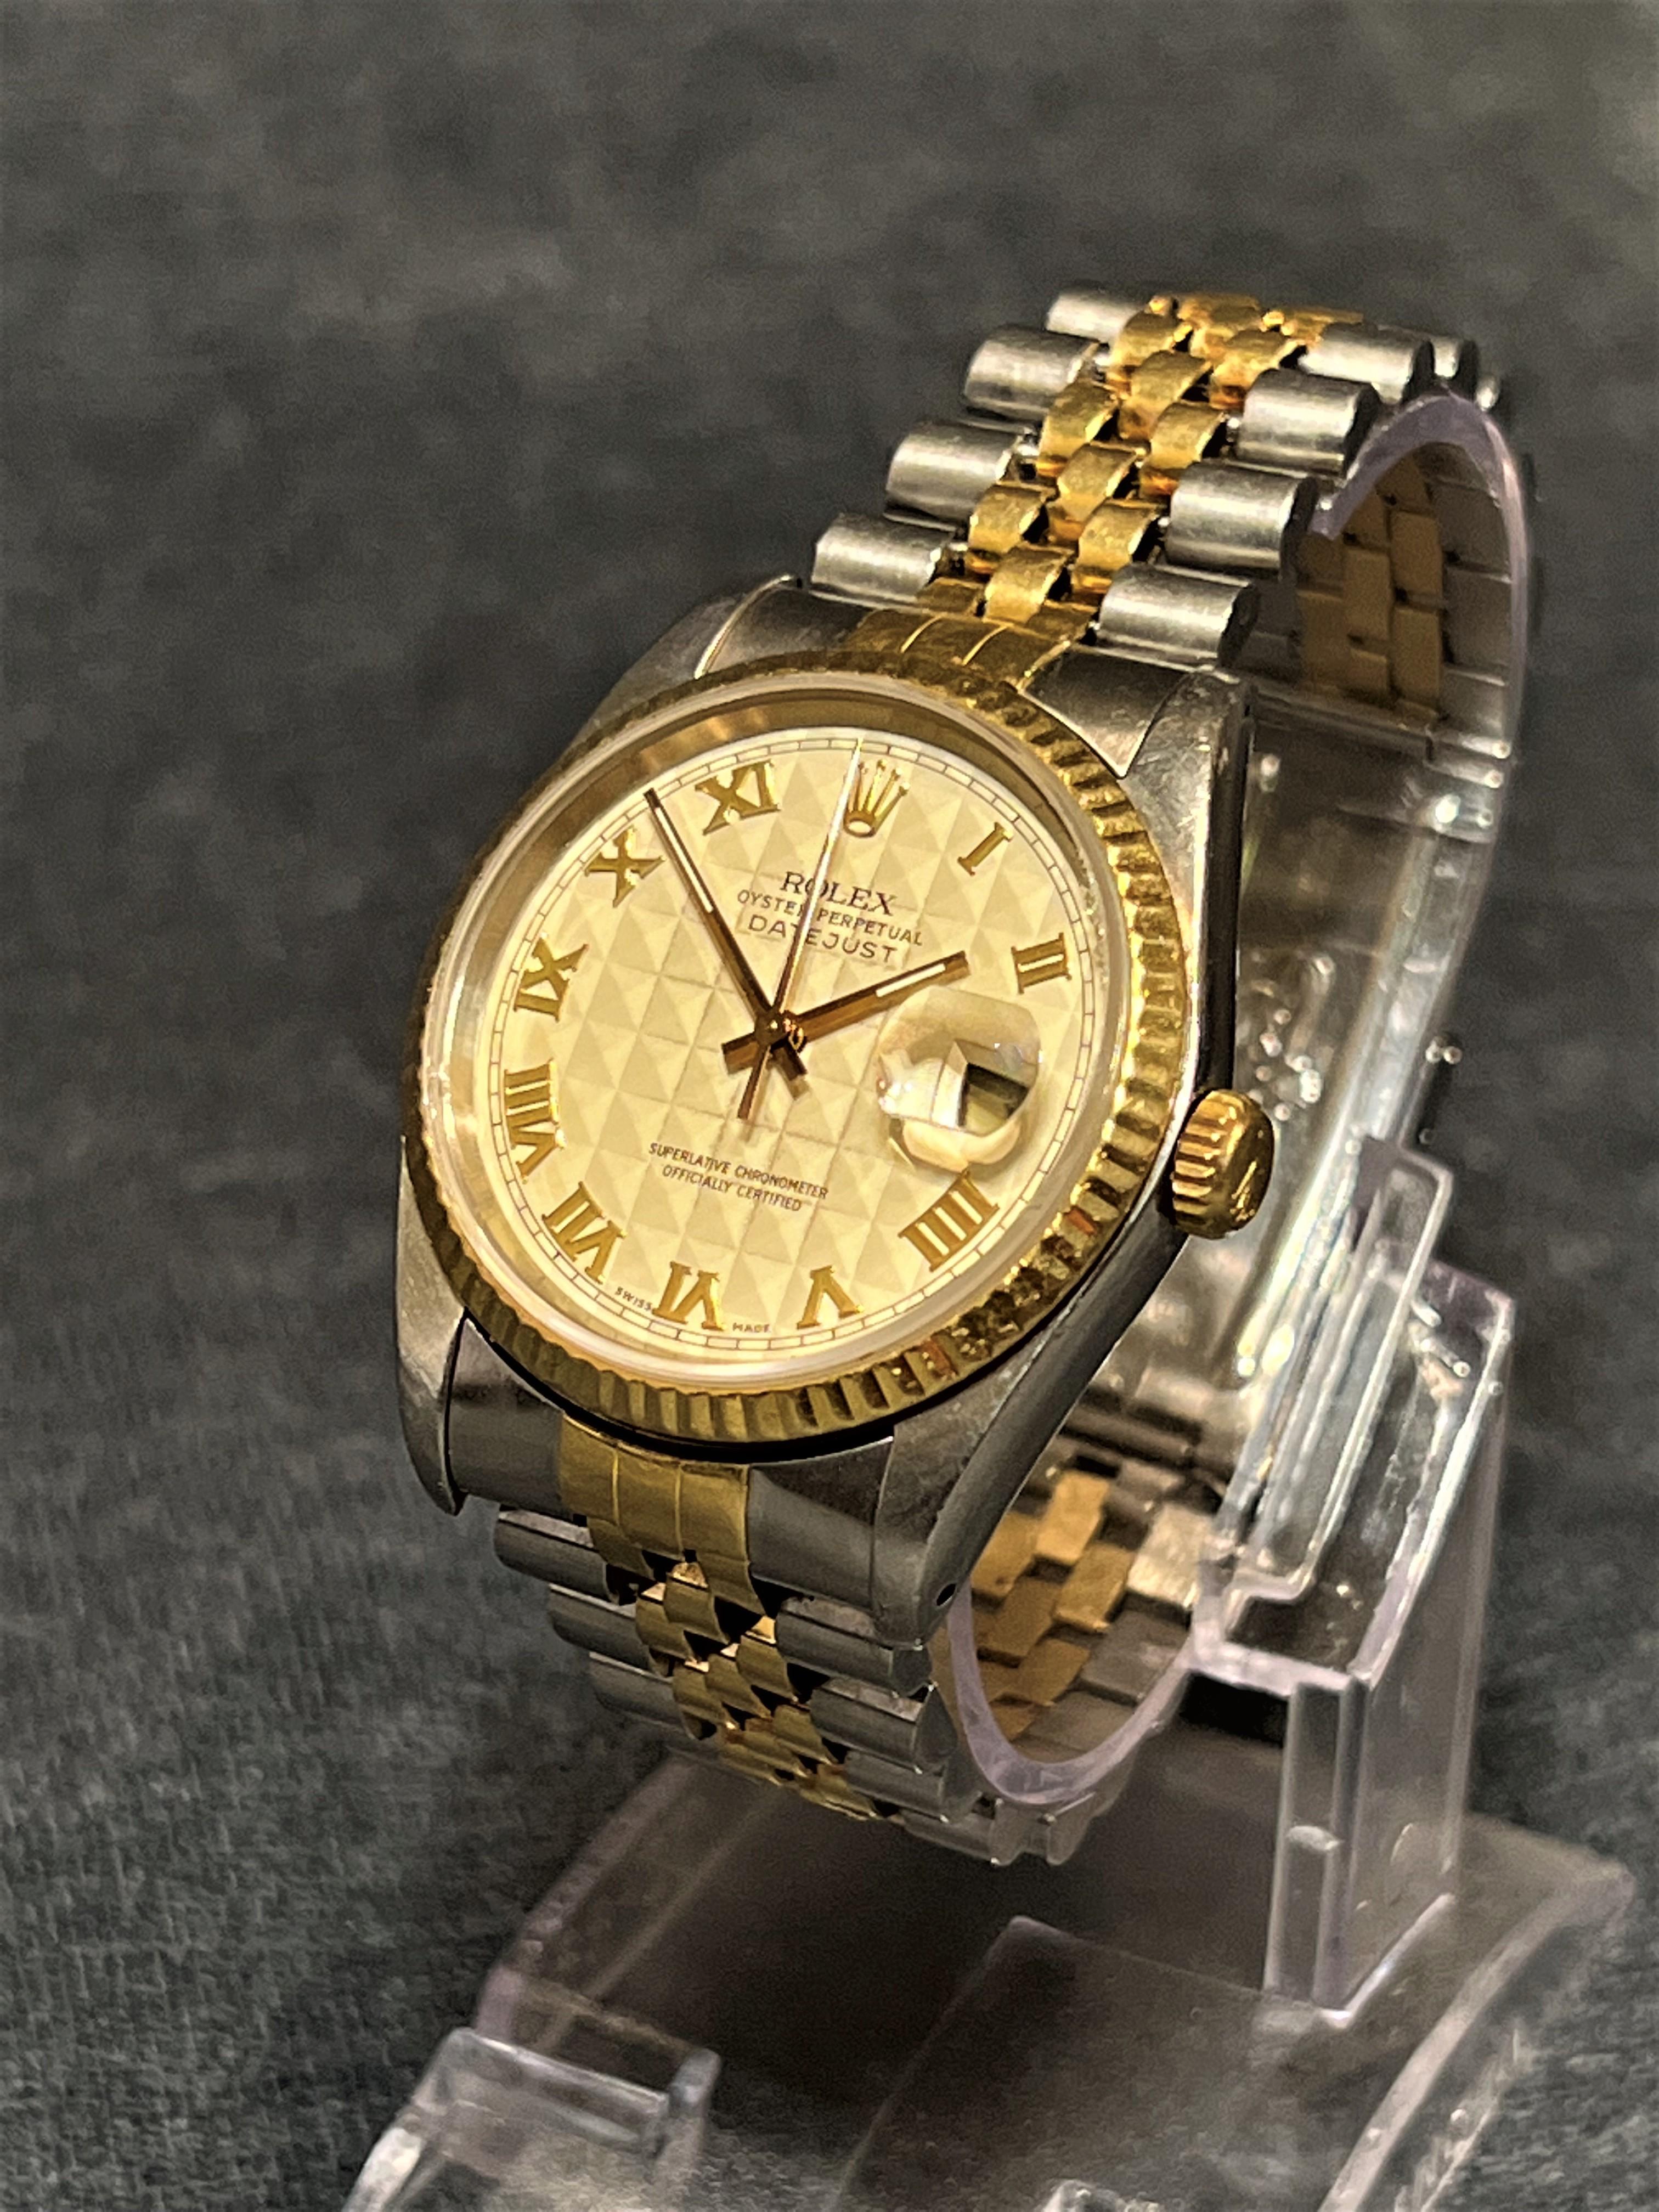 Rolex Datejust Roman Pyramid Dial Wristwatch In Good Condition For Sale In Bradford, Ontario